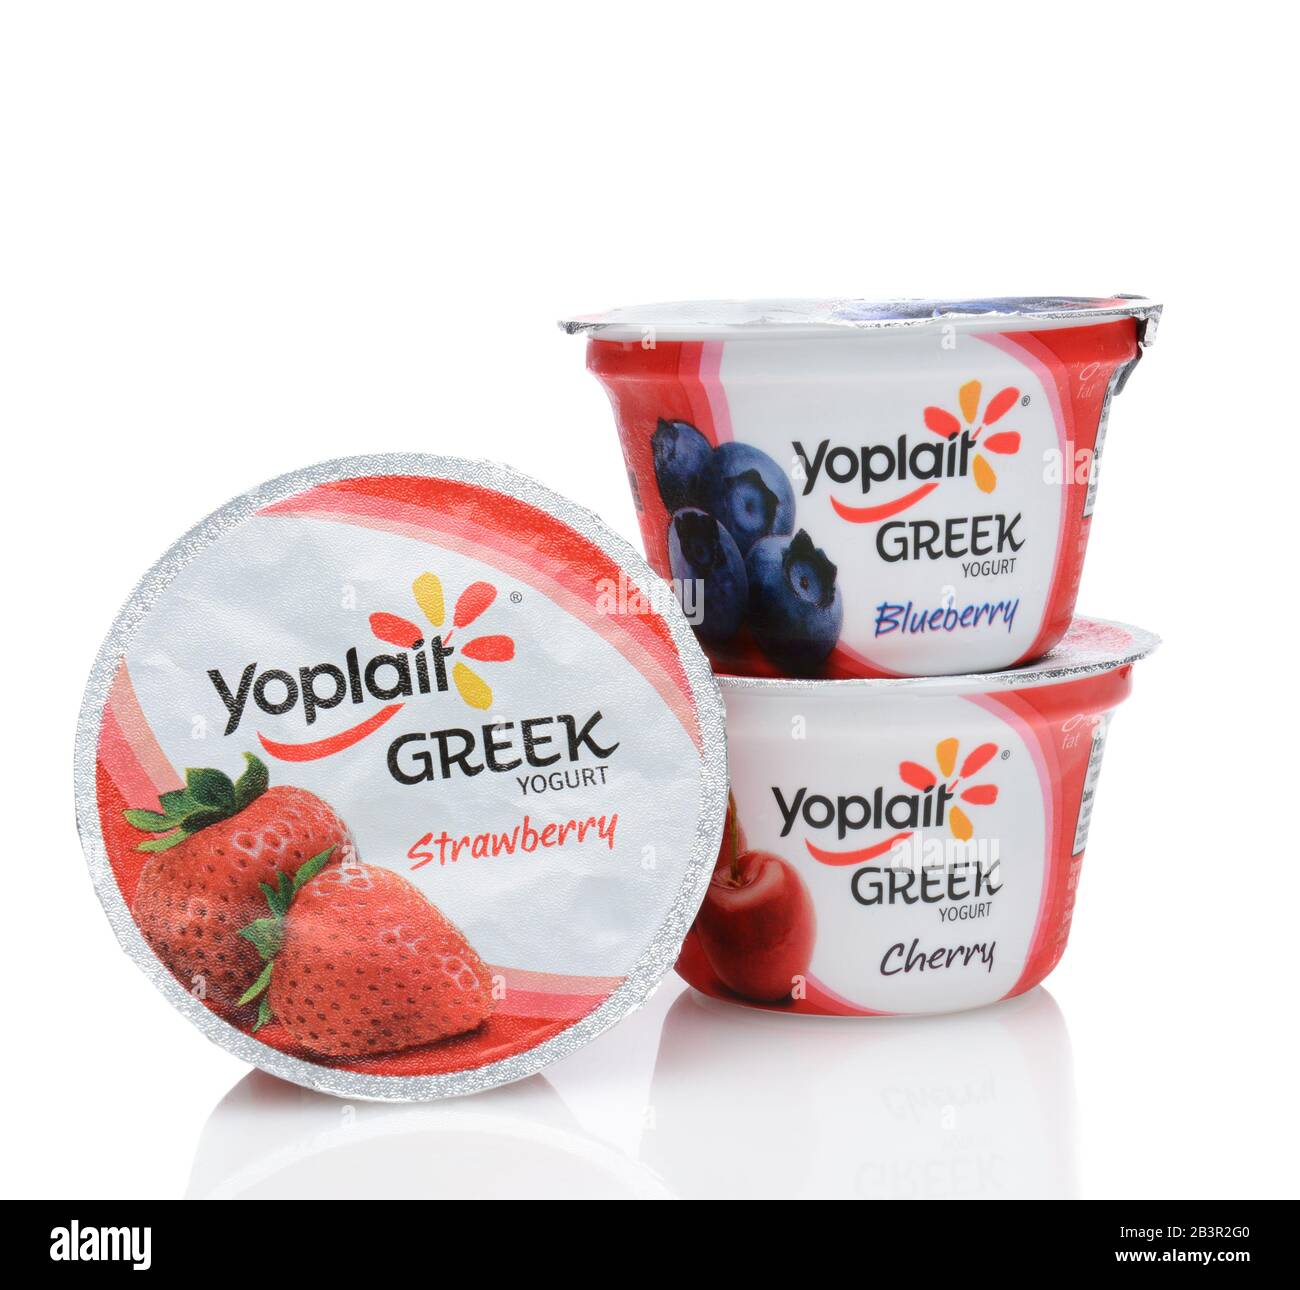 IRVINE, CA - SEPTEMBER 15, 2014: Three containers of Yoplait Greek Yogurt, Cherry, Strawberry, and Blueberry. In 1965, two French dairy co-operatives, Stock Photo